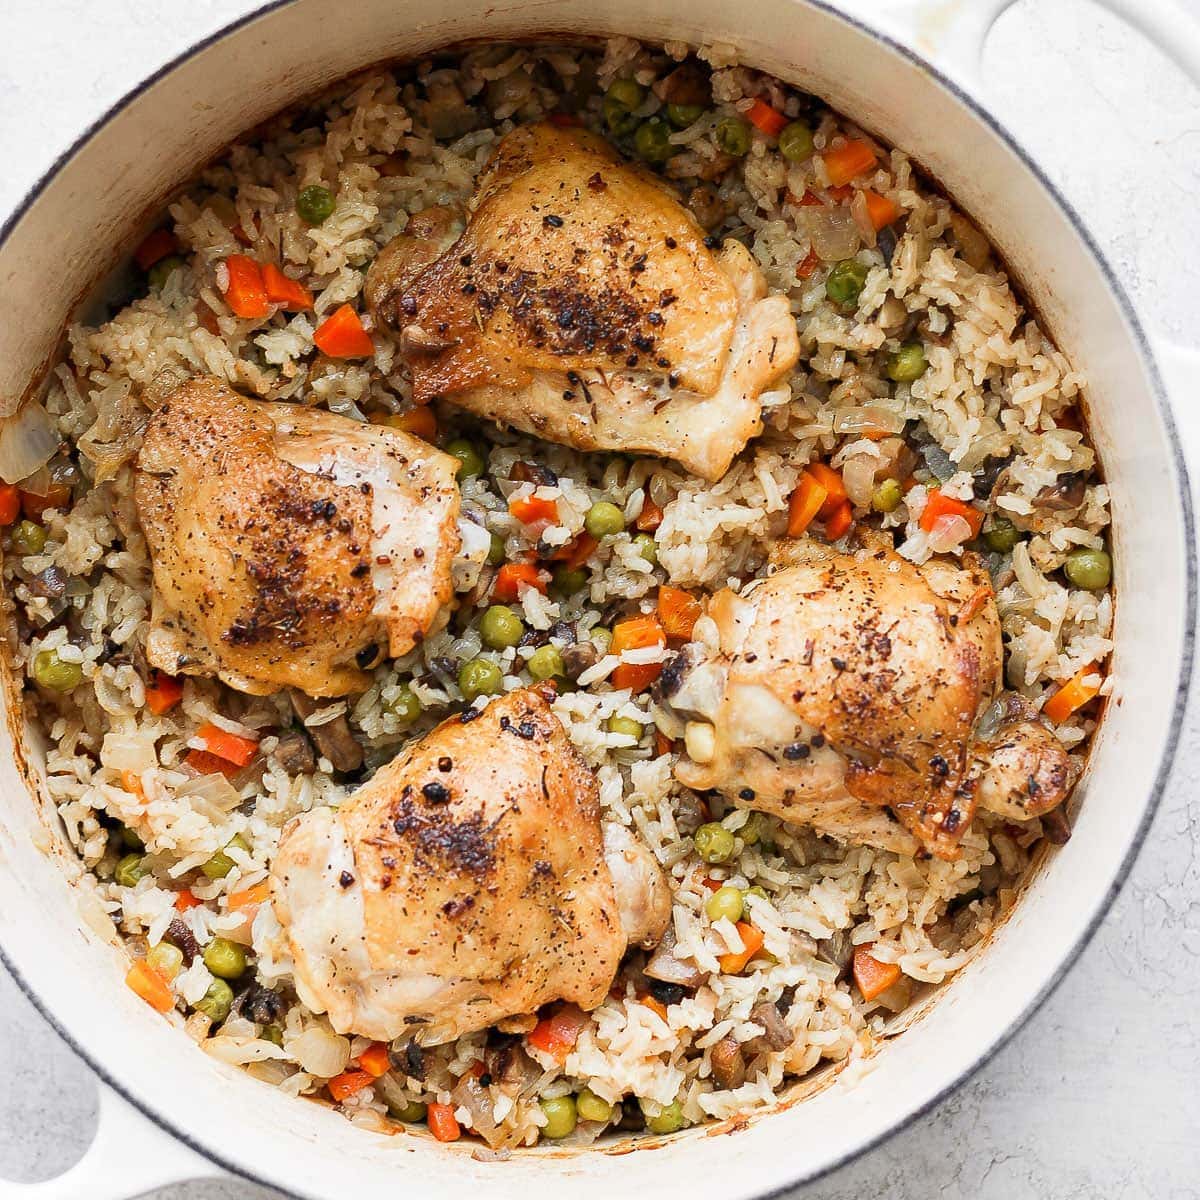 Losing weight 2022: One Pot Chicken and Rice